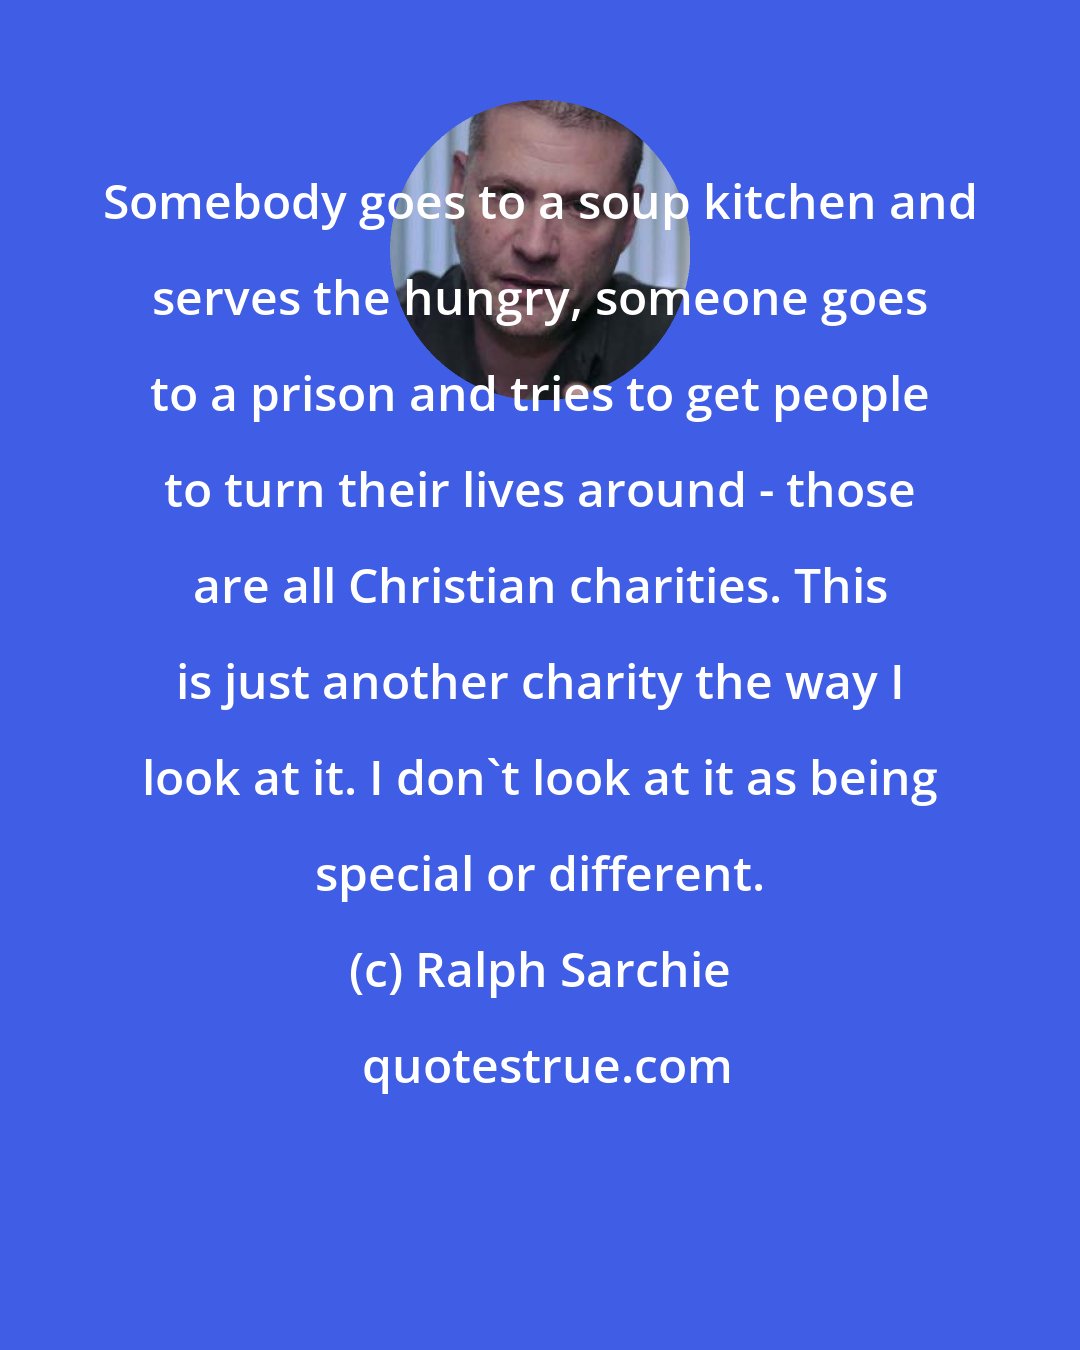 Ralph Sarchie: Somebody goes to a soup kitchen and serves the hungry, someone goes to a prison and tries to get people to turn their lives around - those are all Christian charities. This is just another charity the way I look at it. I don't look at it as being special or different.